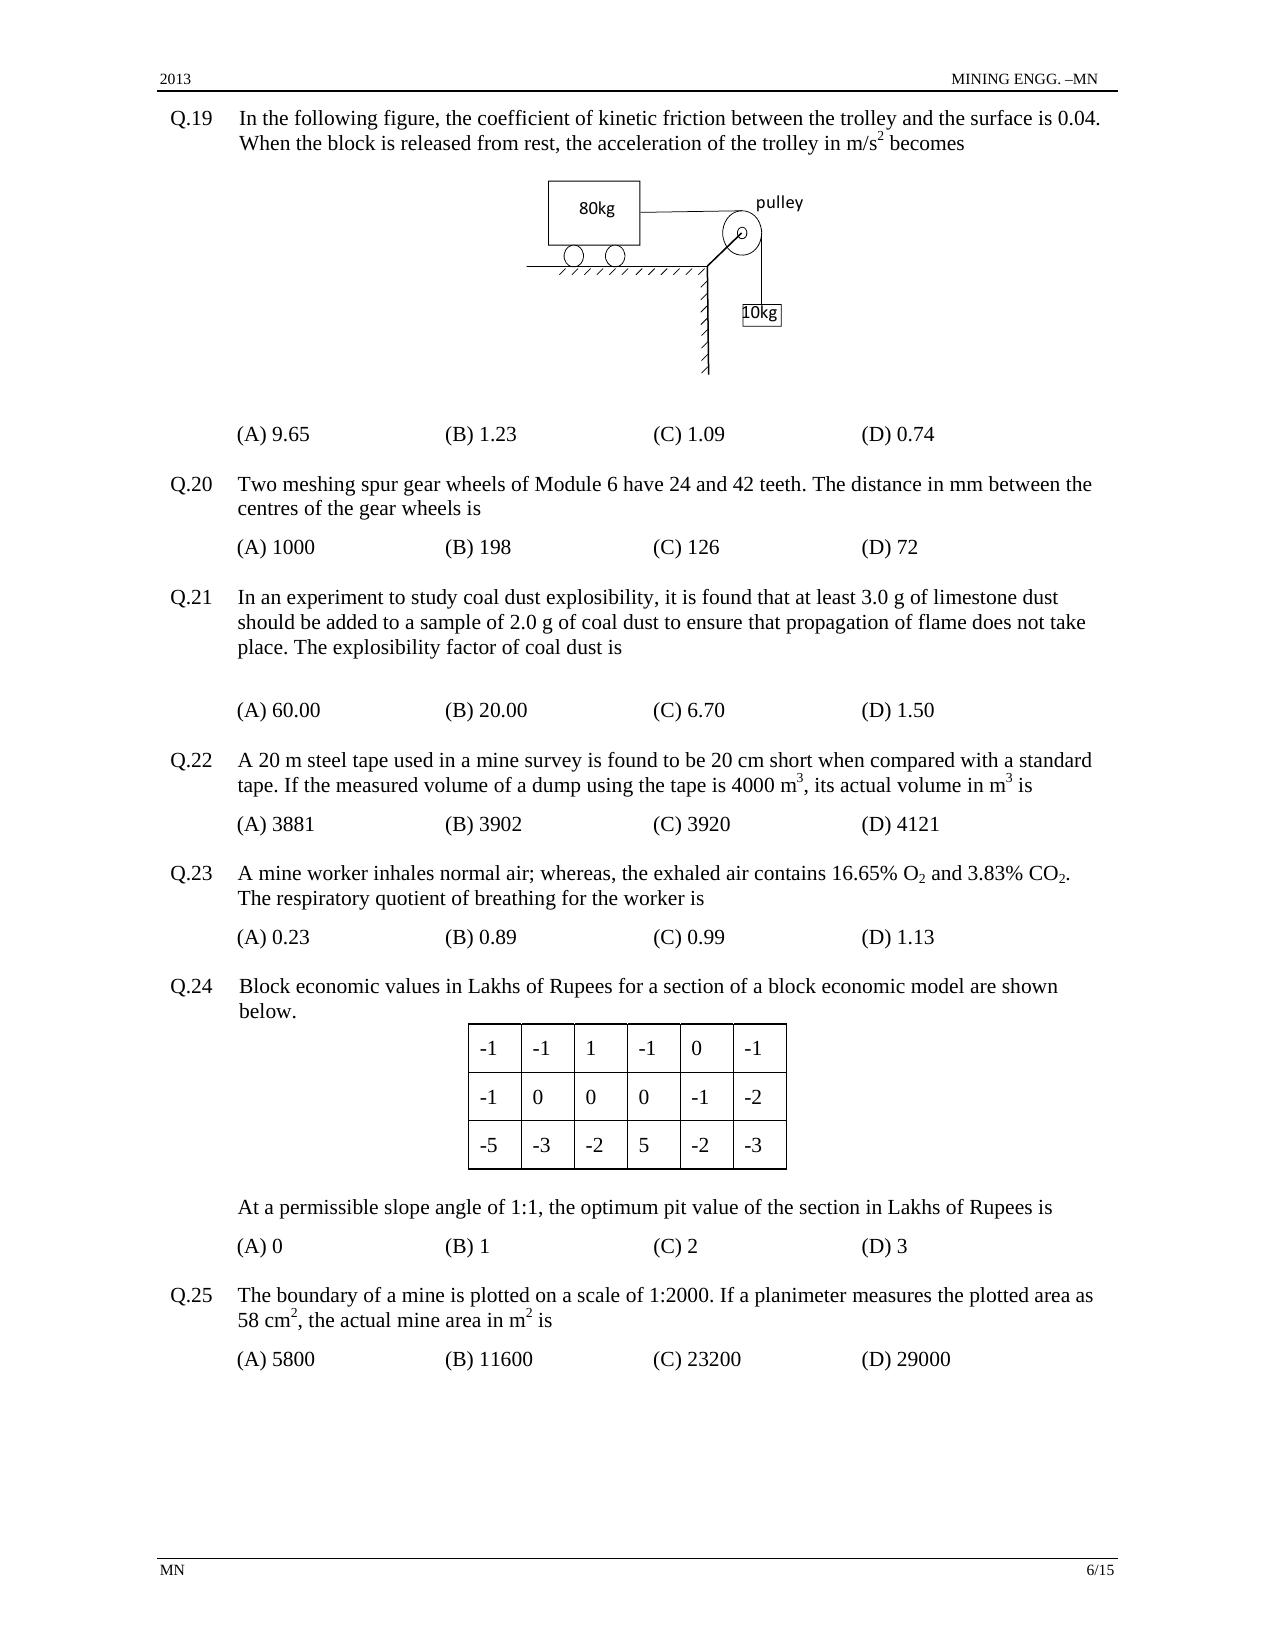 GATE 2013 Mining Engineering (MN) Question Paper with Answer Key - Page 6